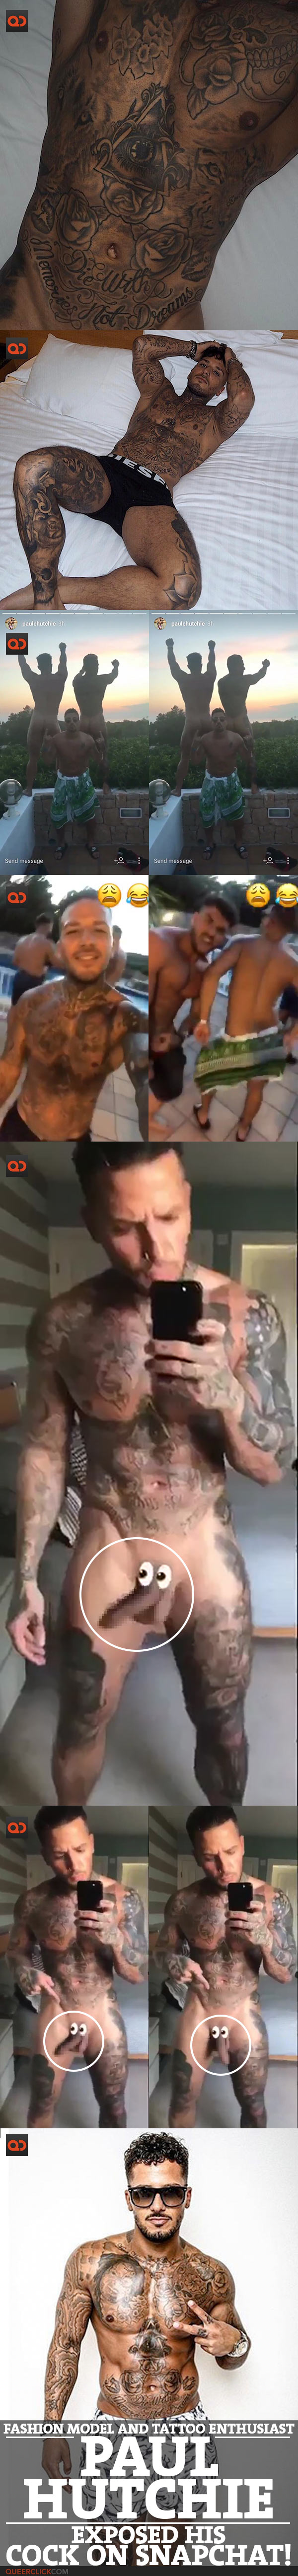 Paul Hutchie, Fashion Model And Tattoo Enthusiast, Exposed His Cock On Snapchat!